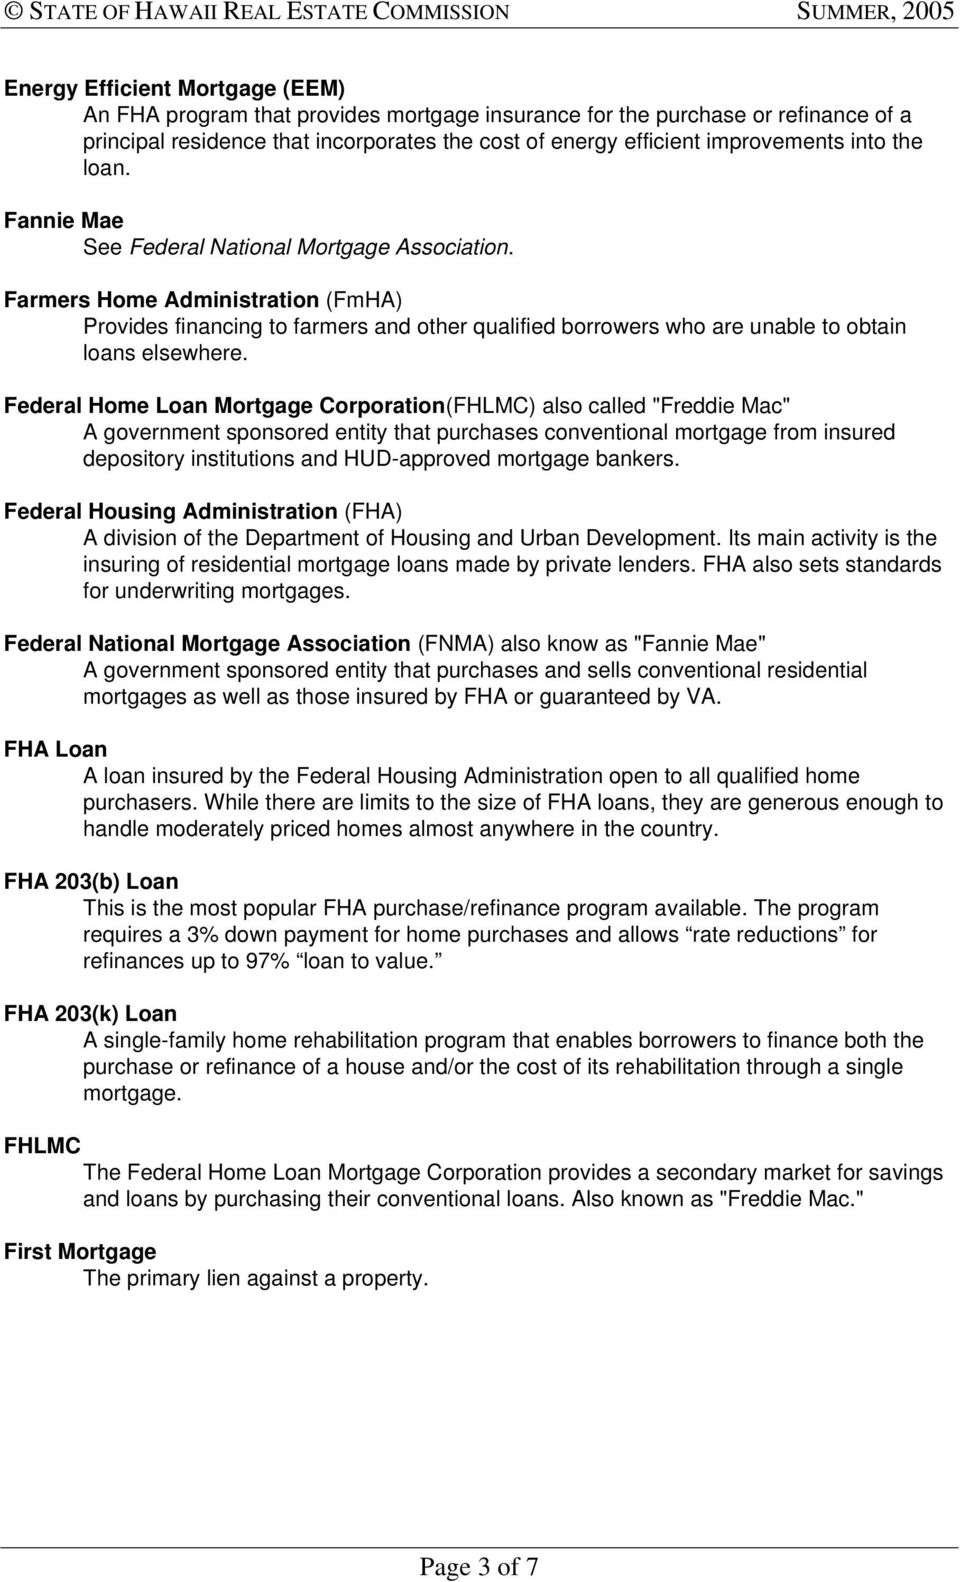 Federal Home Loan Mortgage Corporation(FHLMC) also called "Freddie Mac" A government sponsored entity that purchases conventional mortgage from insured depository institutions and HUD-approved